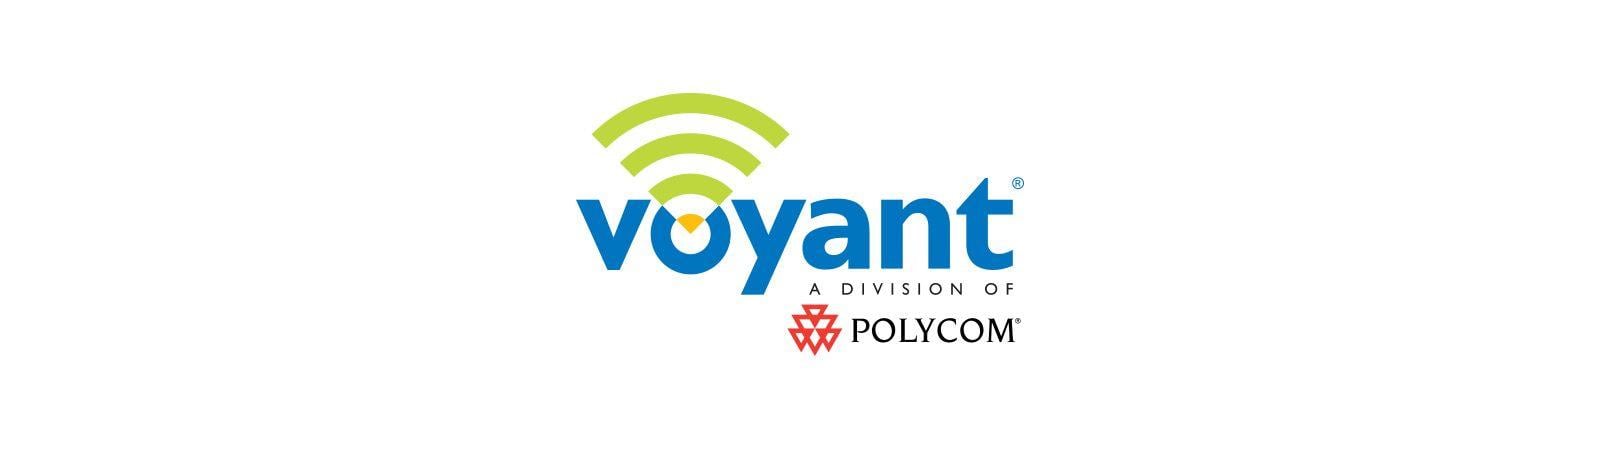 Voyant Logo - Voyant | Technology Sector | TA | A Private Equity Firm